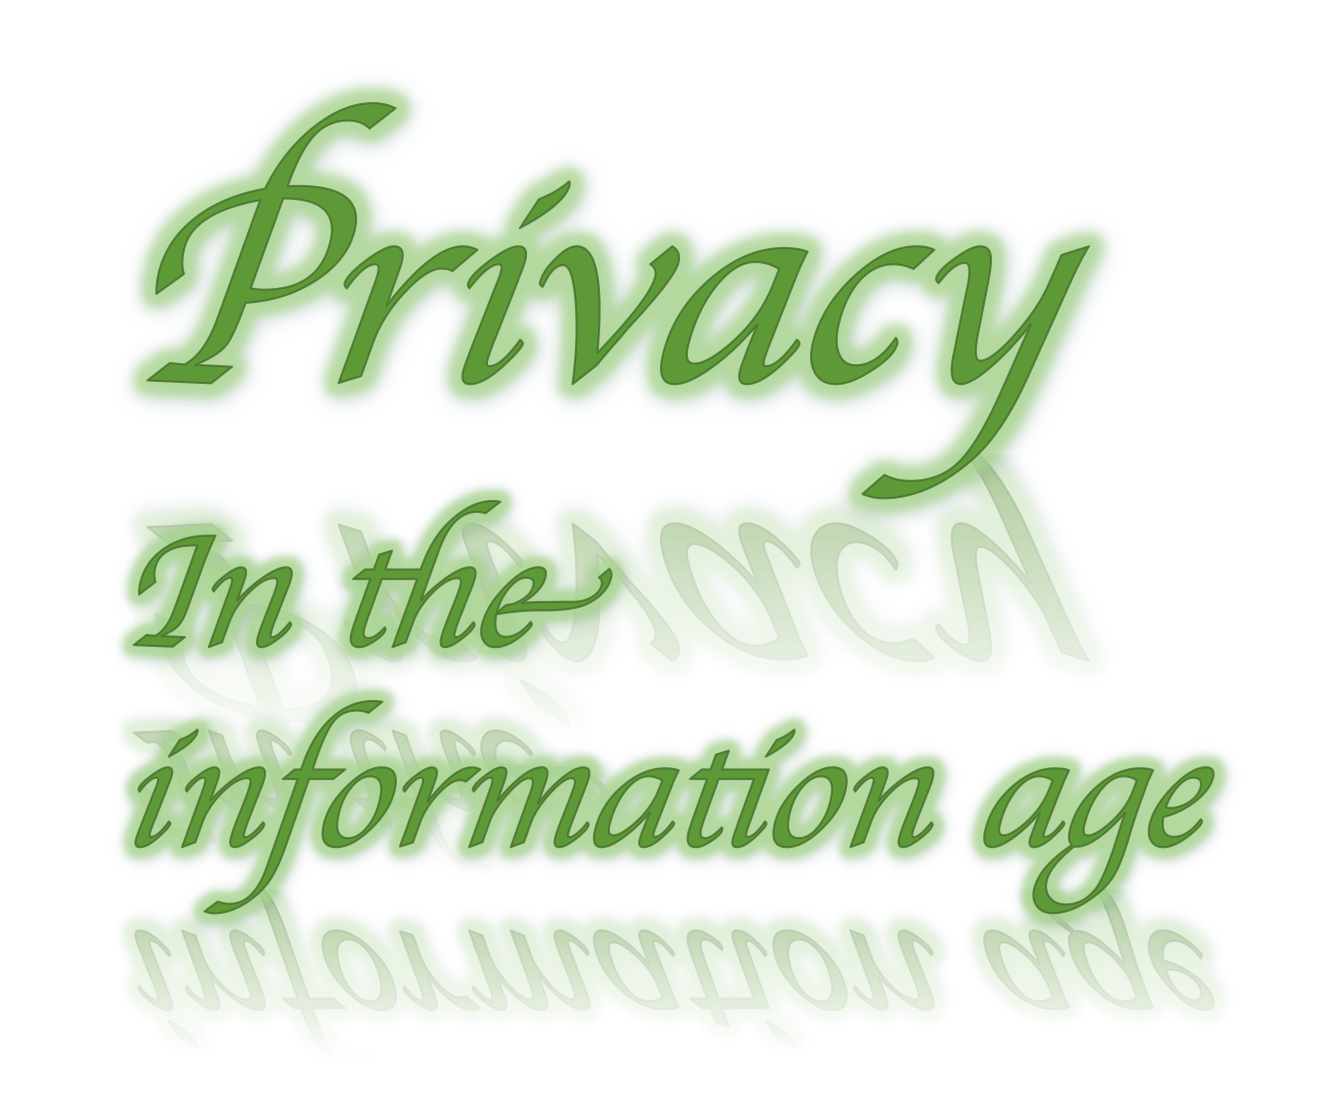 privacy in the information age